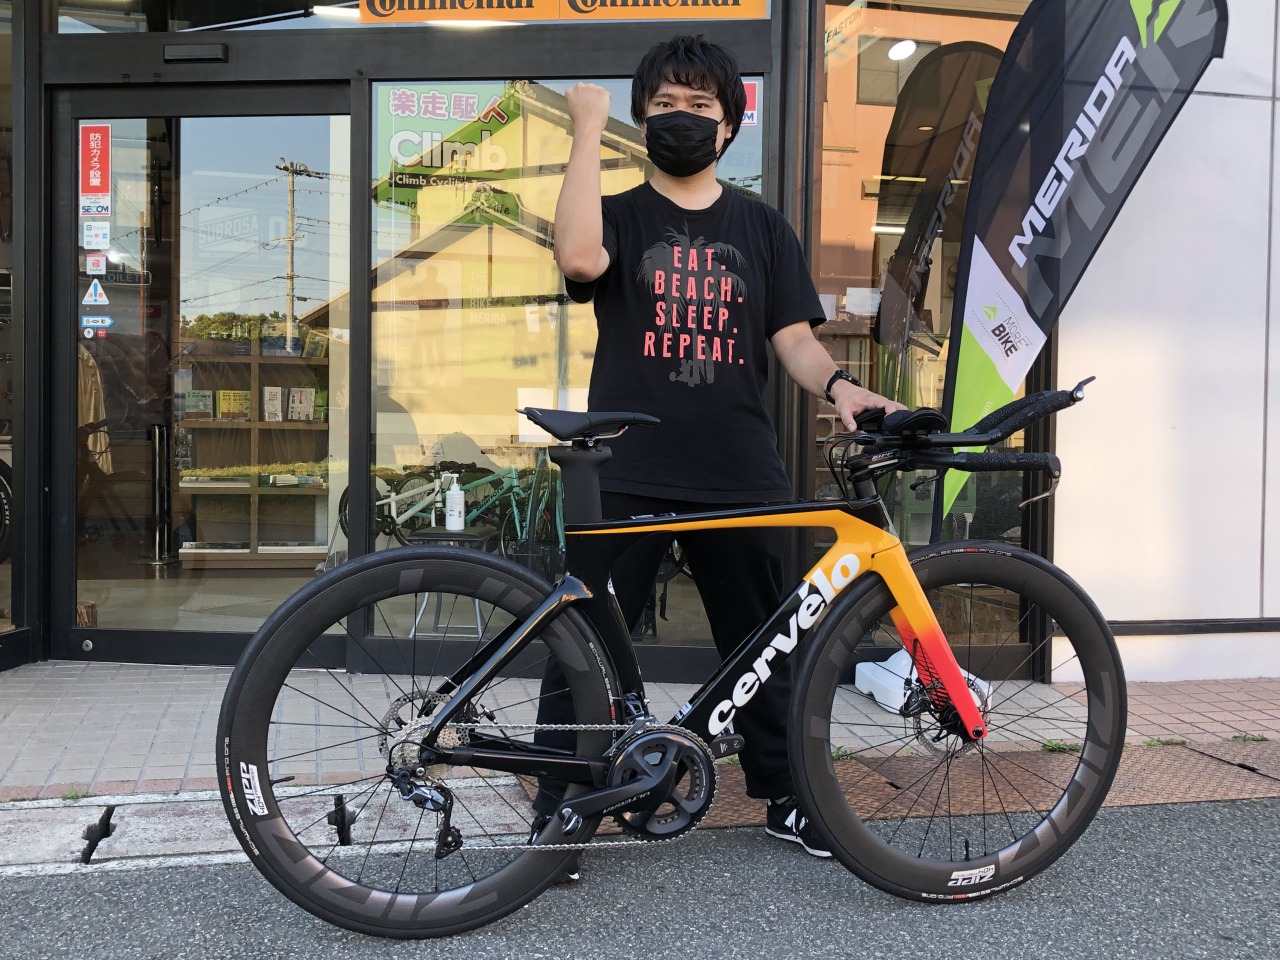 Cervelo P series 納車…from Yさま！ - Climb cycle sports